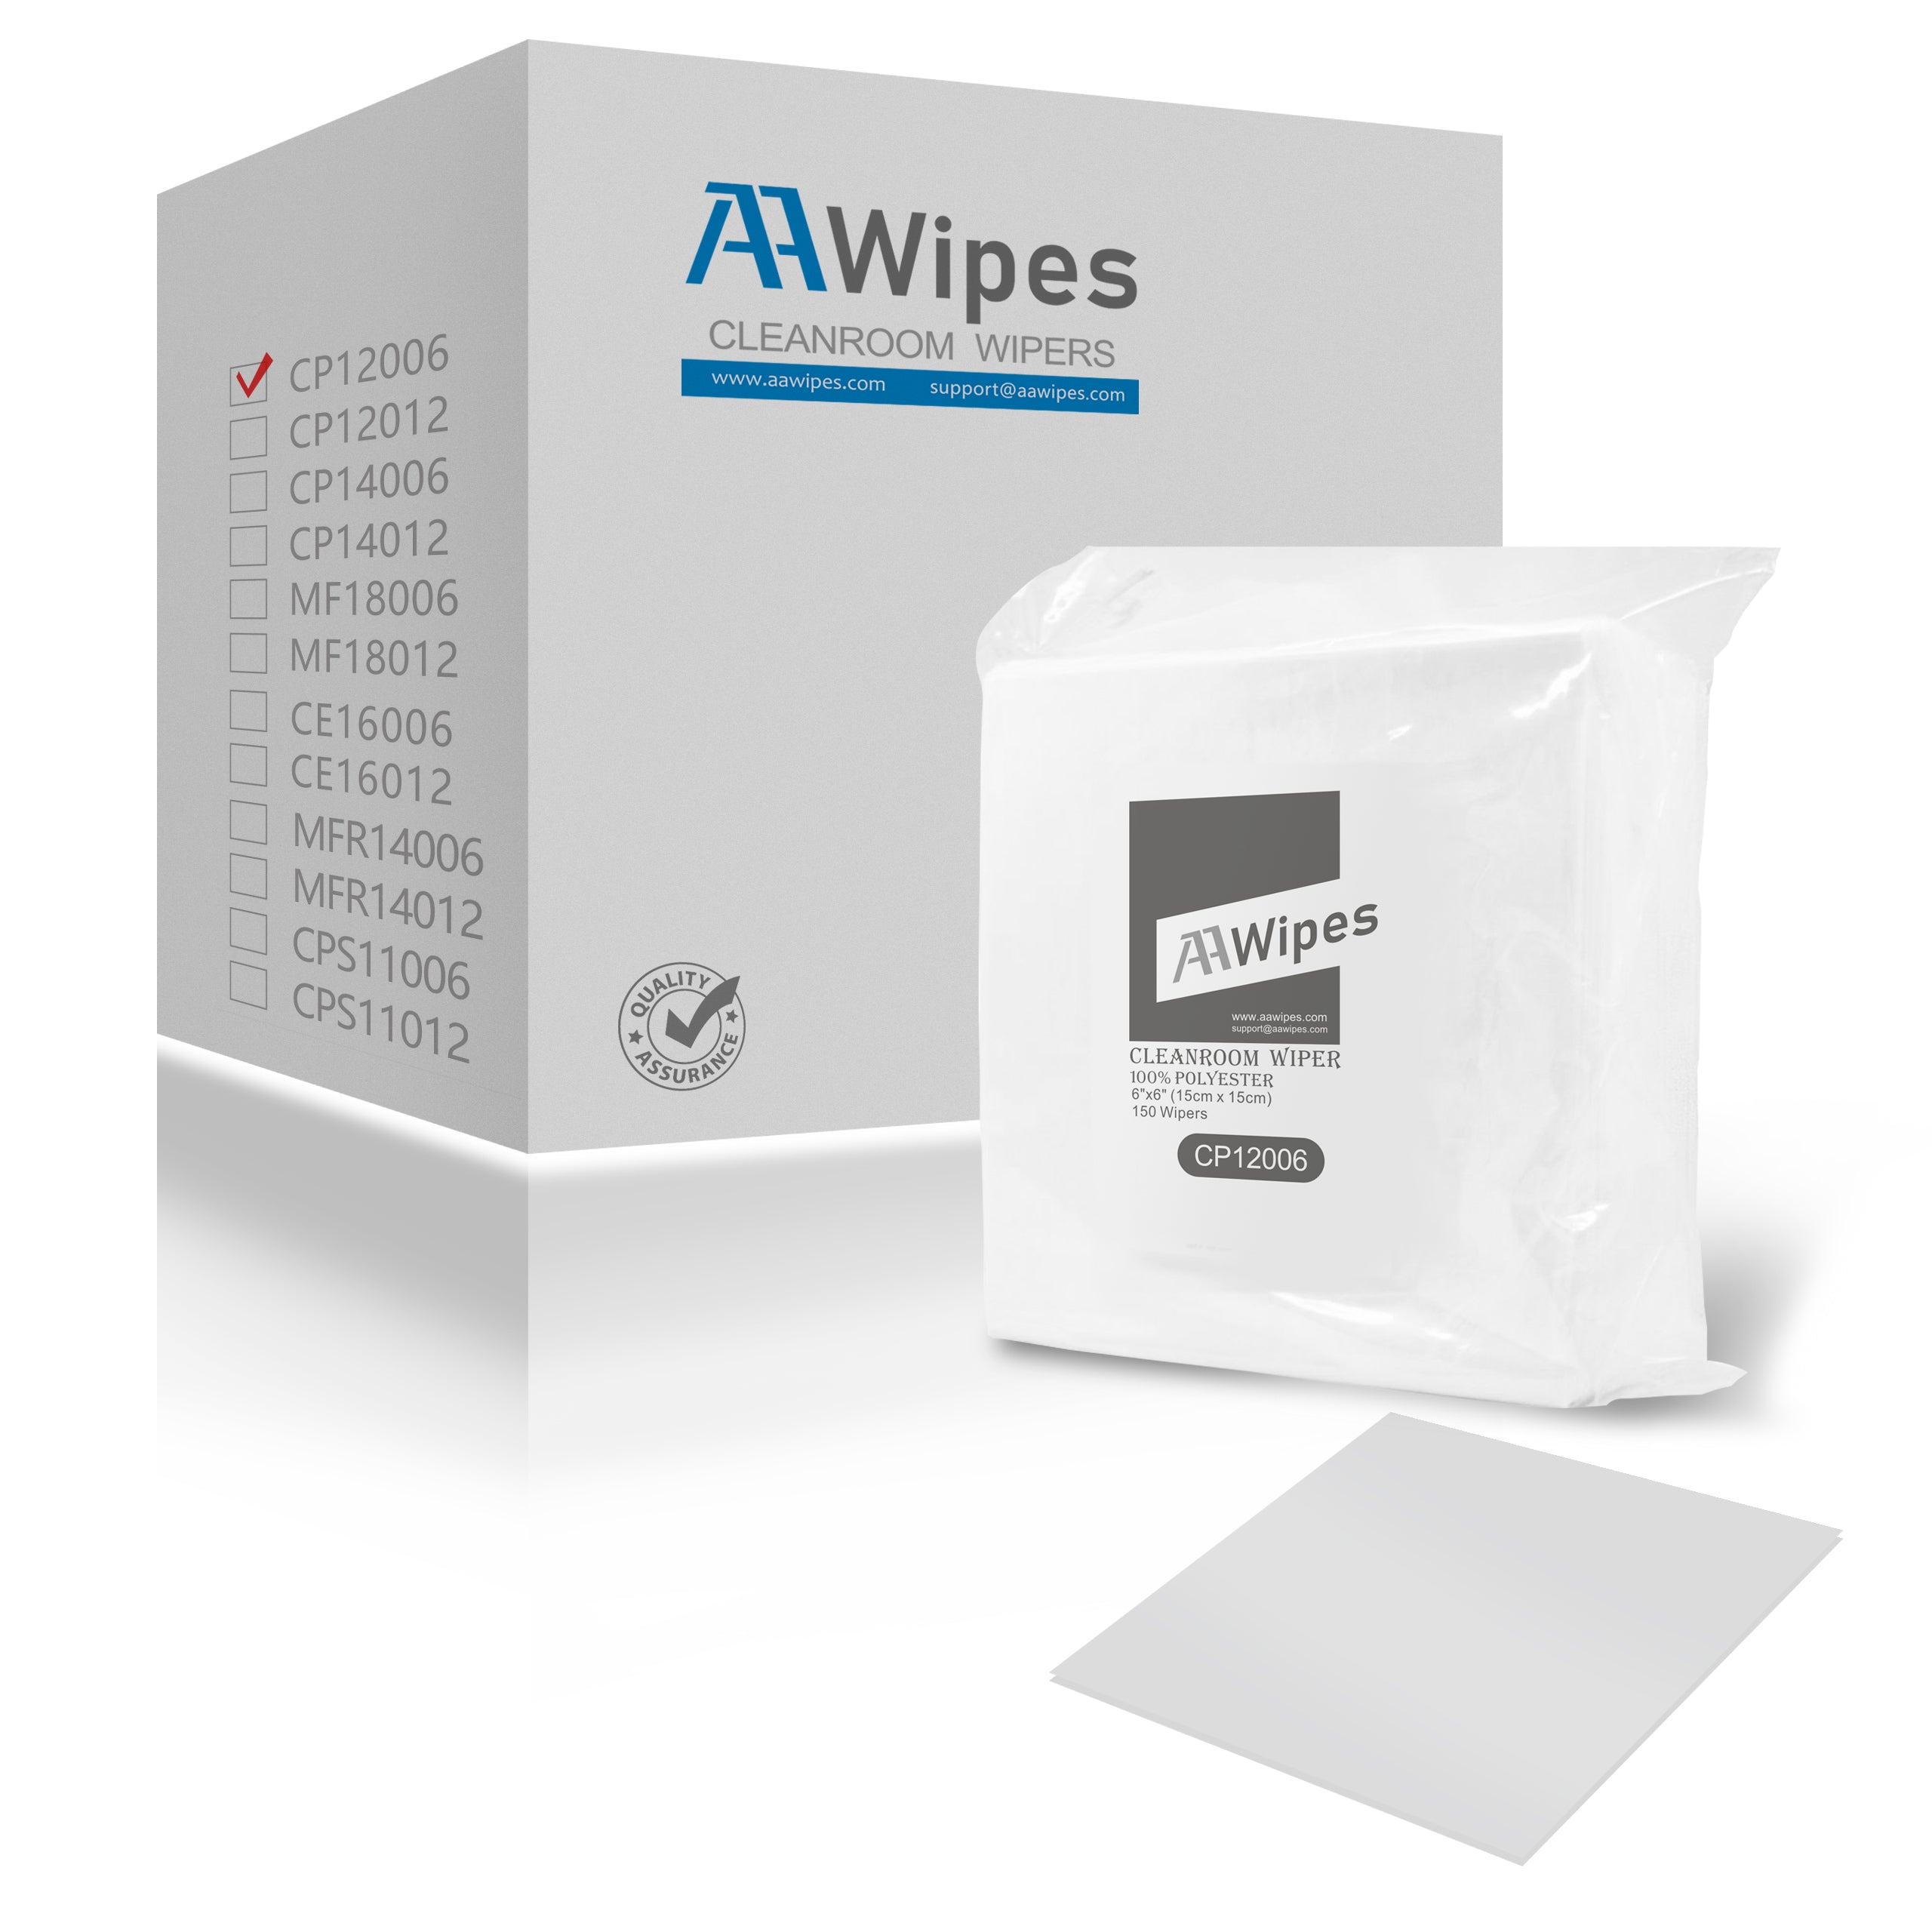 Superior Polyester Cleanroom Wipes 6"x6" Double Knit cloth, 6"x 6" 100% Polyester Wiper Multi-Use for Optimal Precision Cleaning. 6,000 wipes/box, 40 bags (No. CP12006).